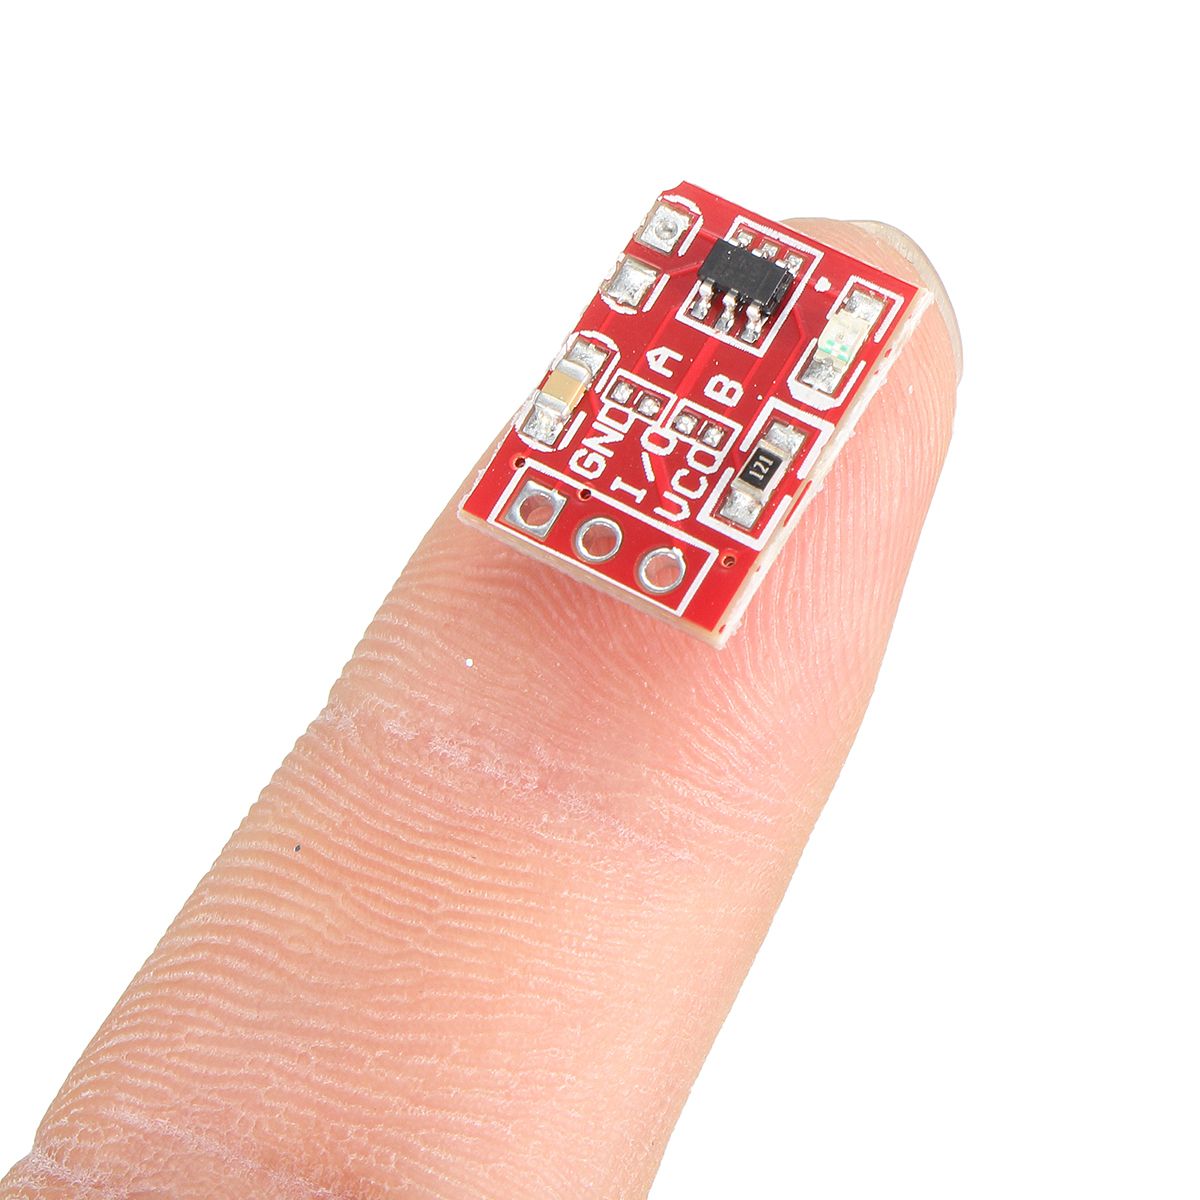 30pcs-25-55V-TTP223-Capacitive-Touch-Switch-Button-Self-Lock-Module-1338049